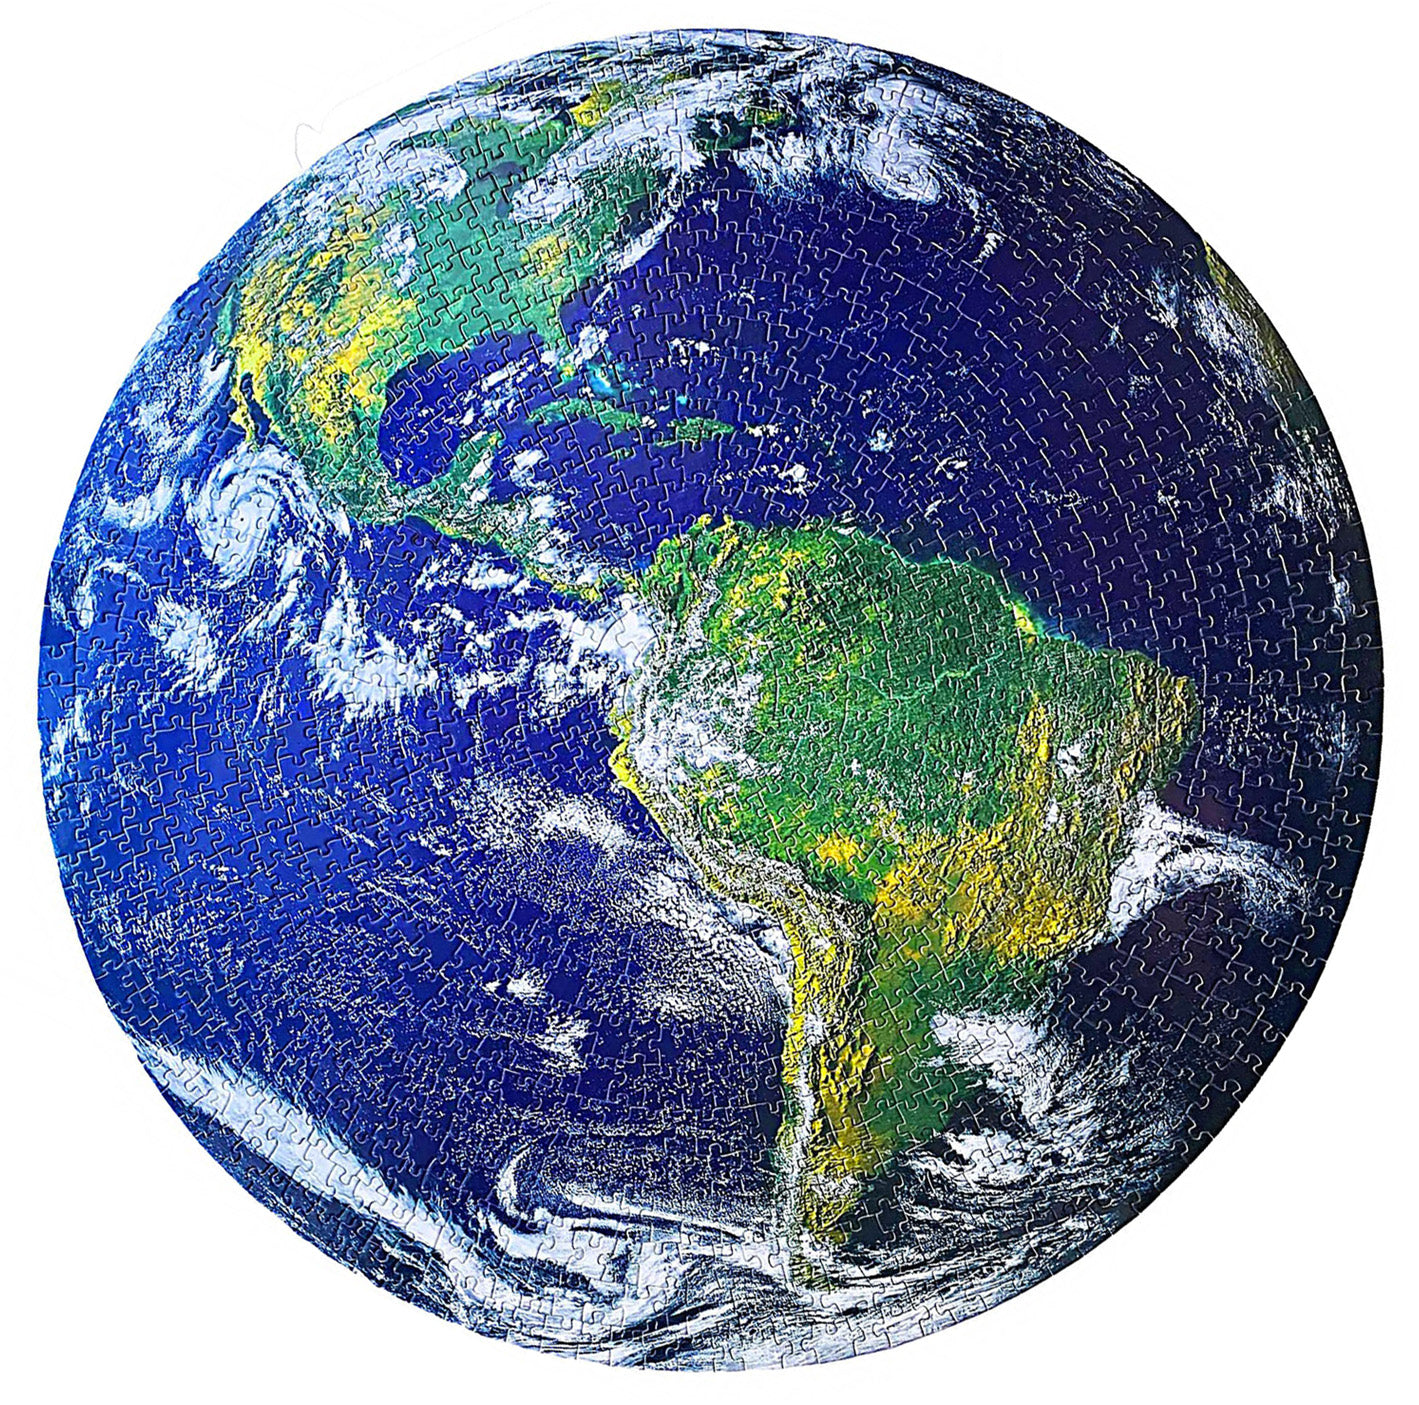 Celebrate Earth Day 2022 with Rest In Pieces's high quality 1000-piece round earth jigsaw puzzle for adults.